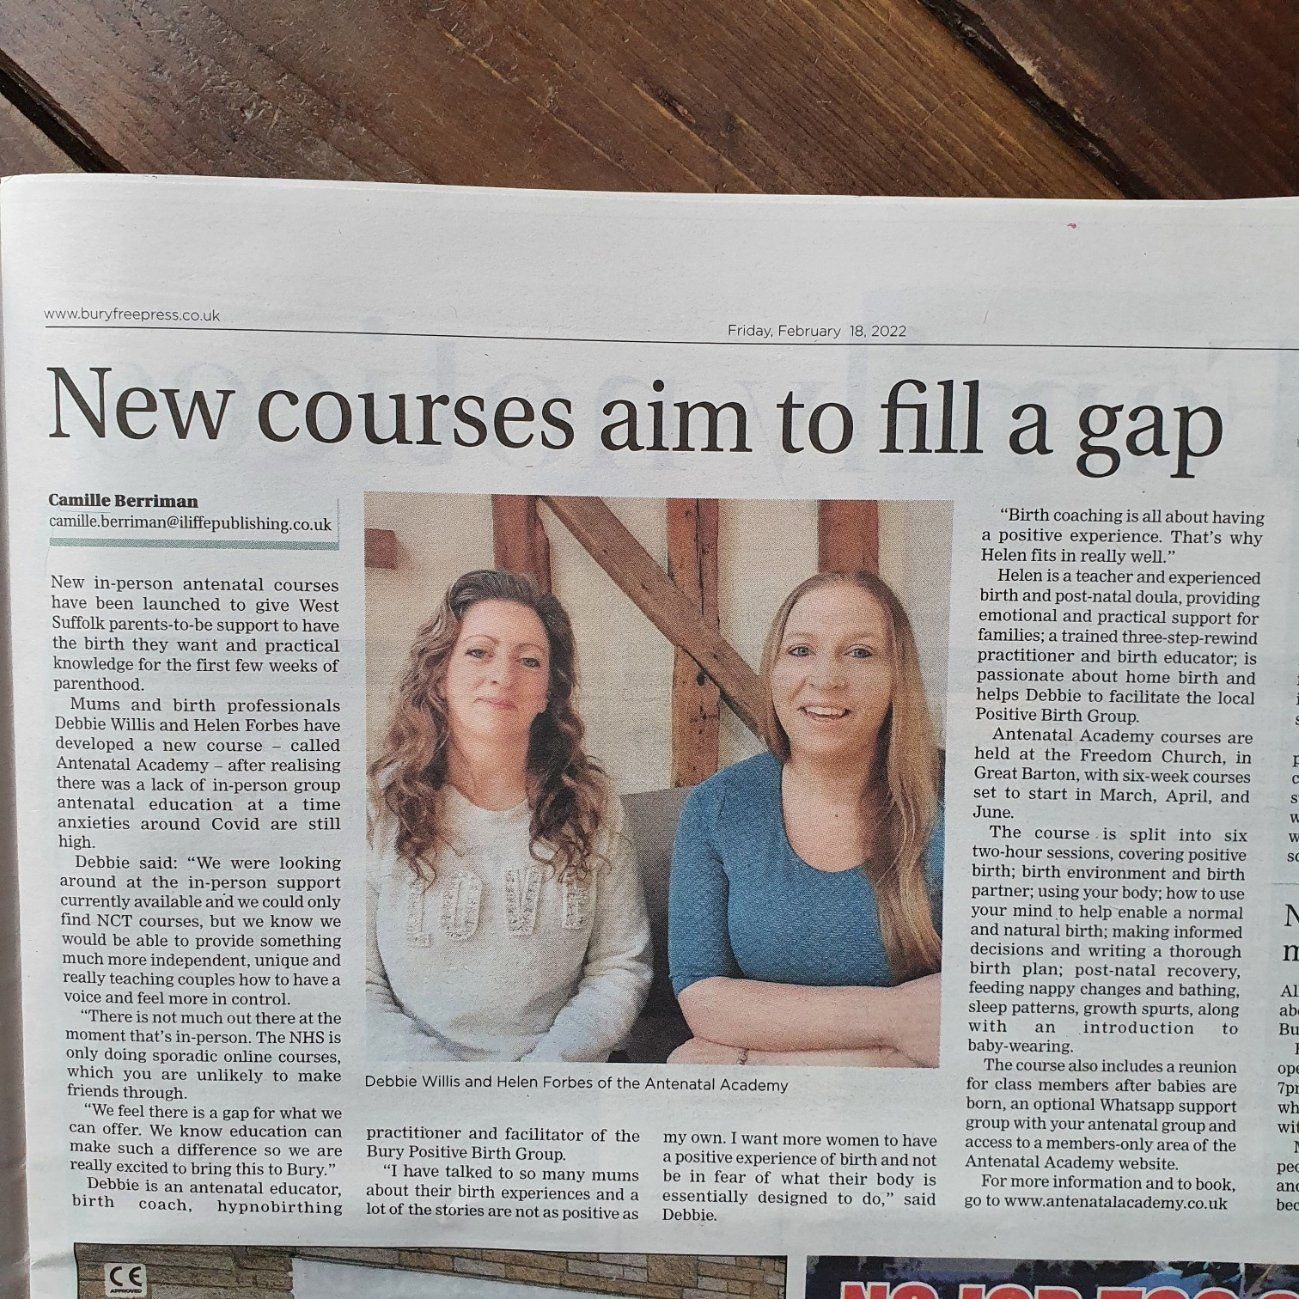 Antenatal Academy in the News